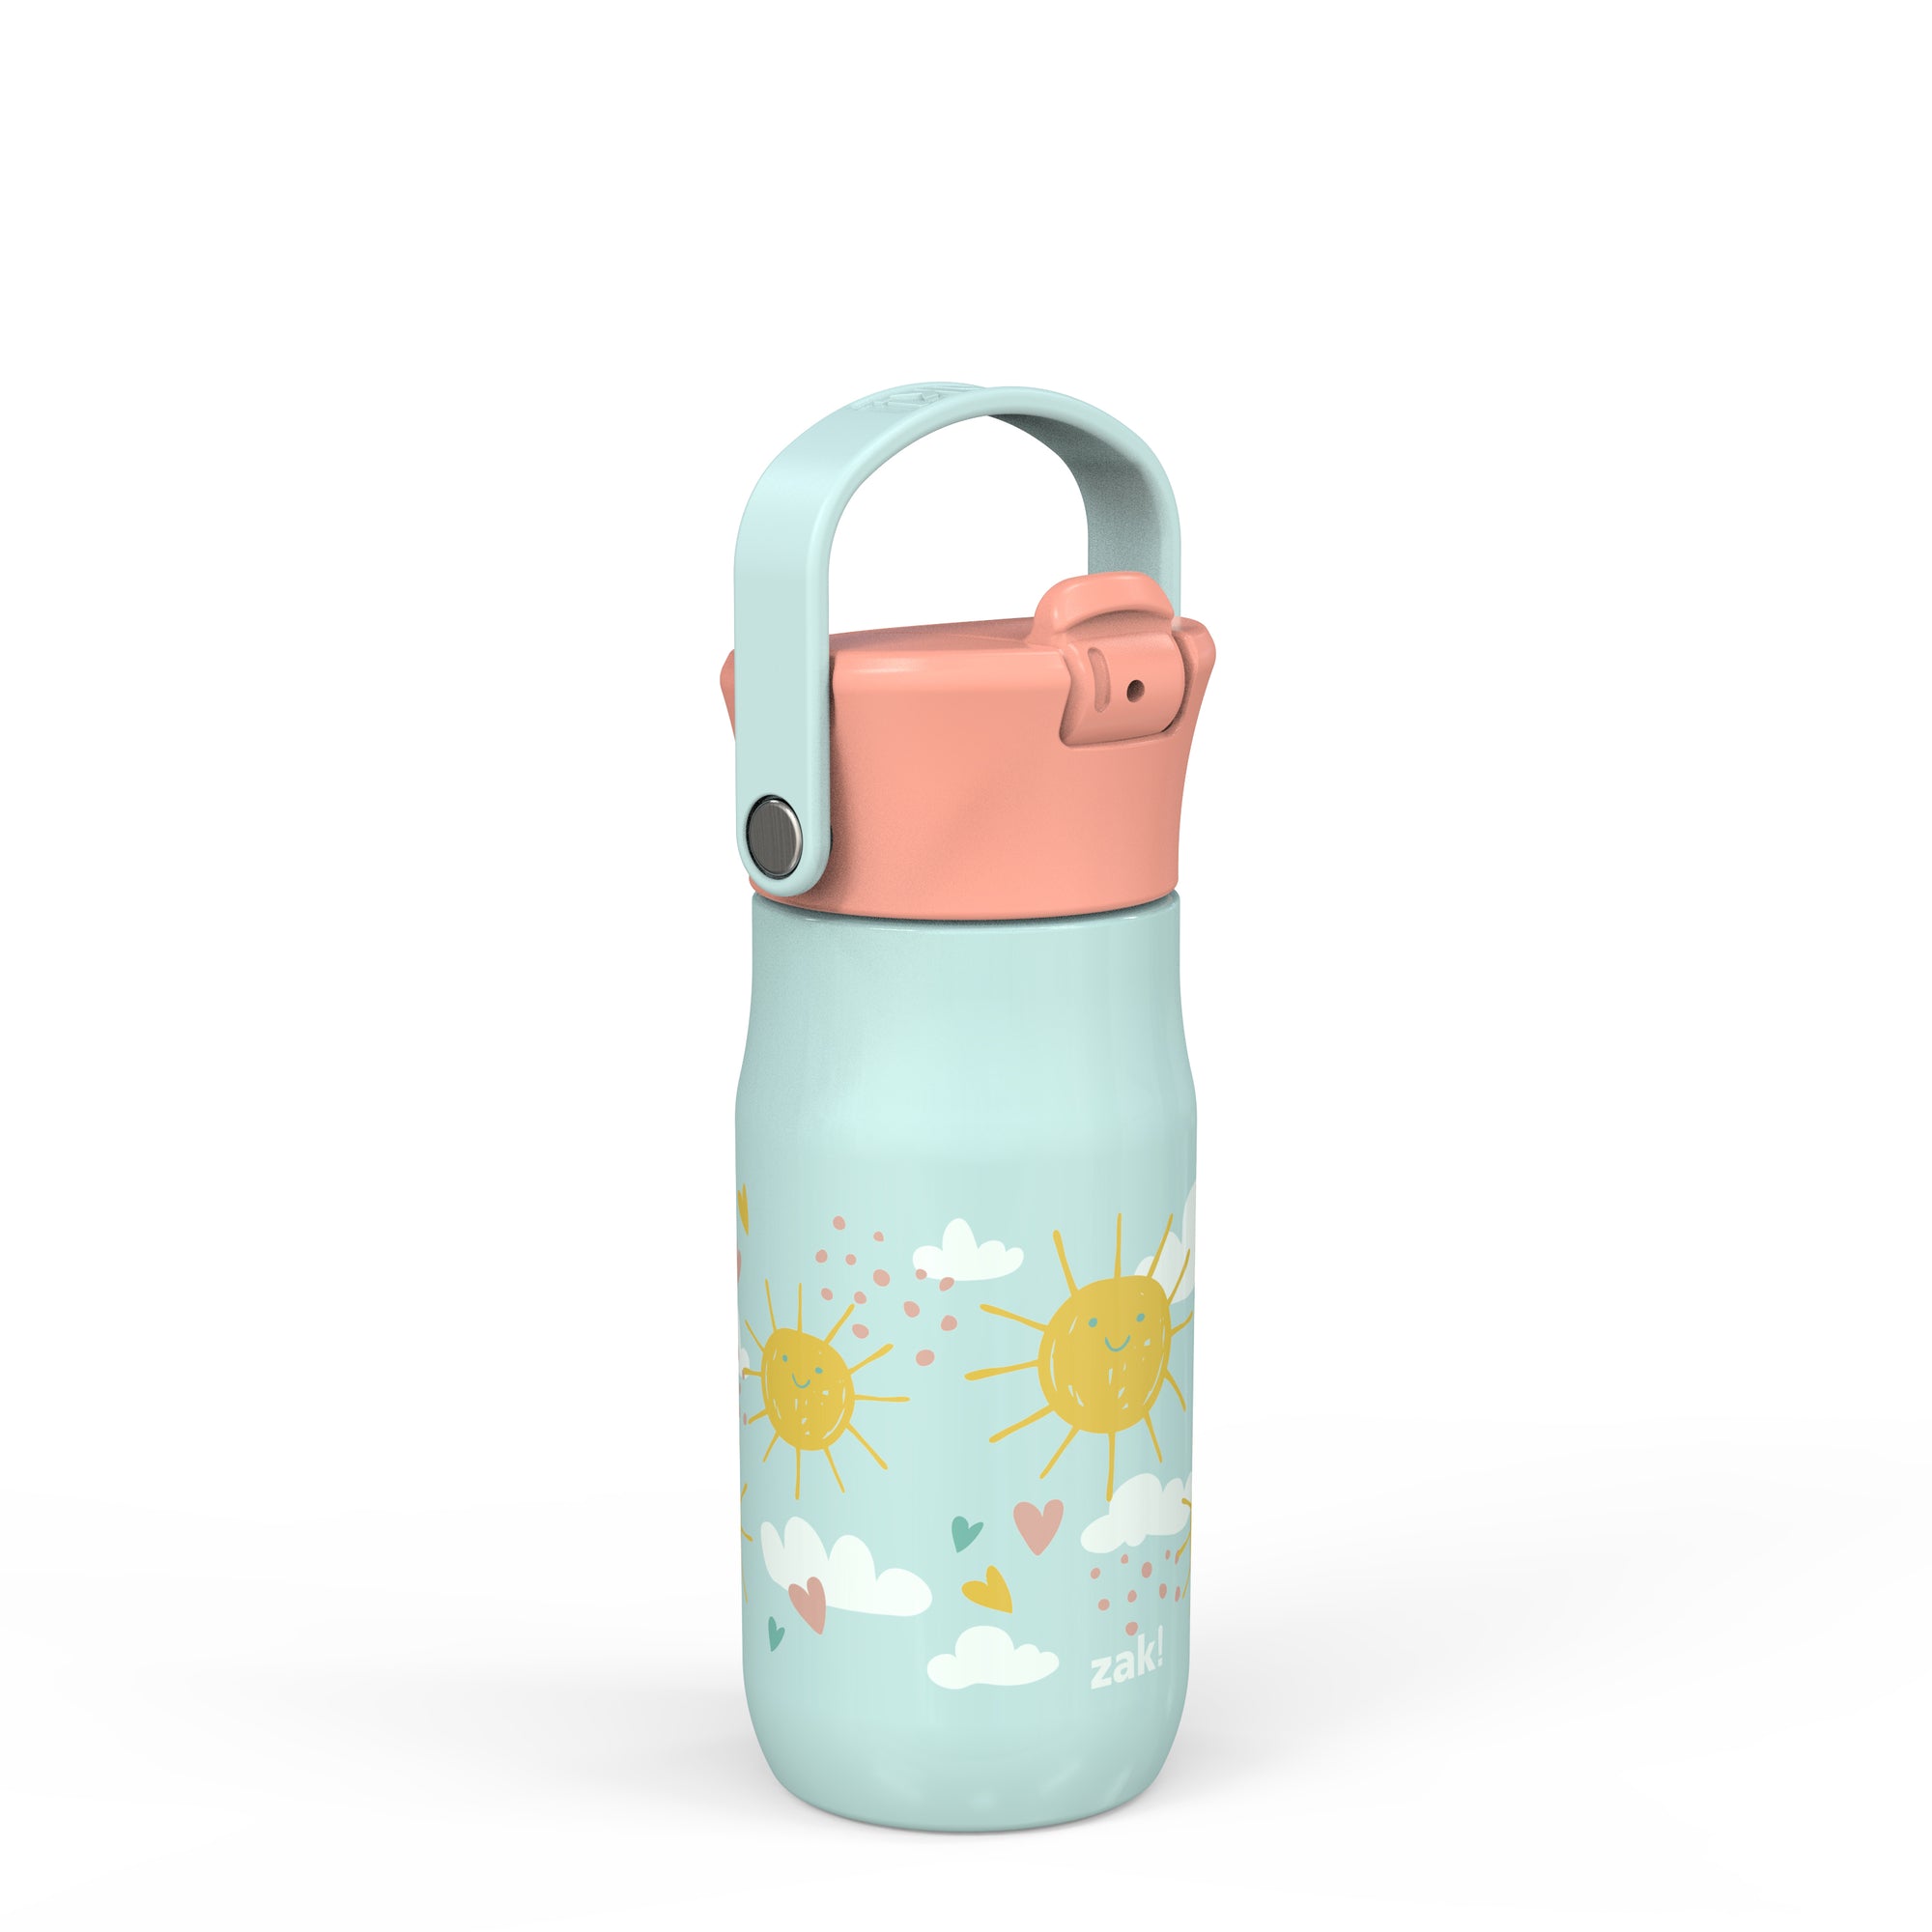 Happy Skies Harmony Recycled Stainless Steel Kids Water Bottle with Straw Spout, 14 ounces